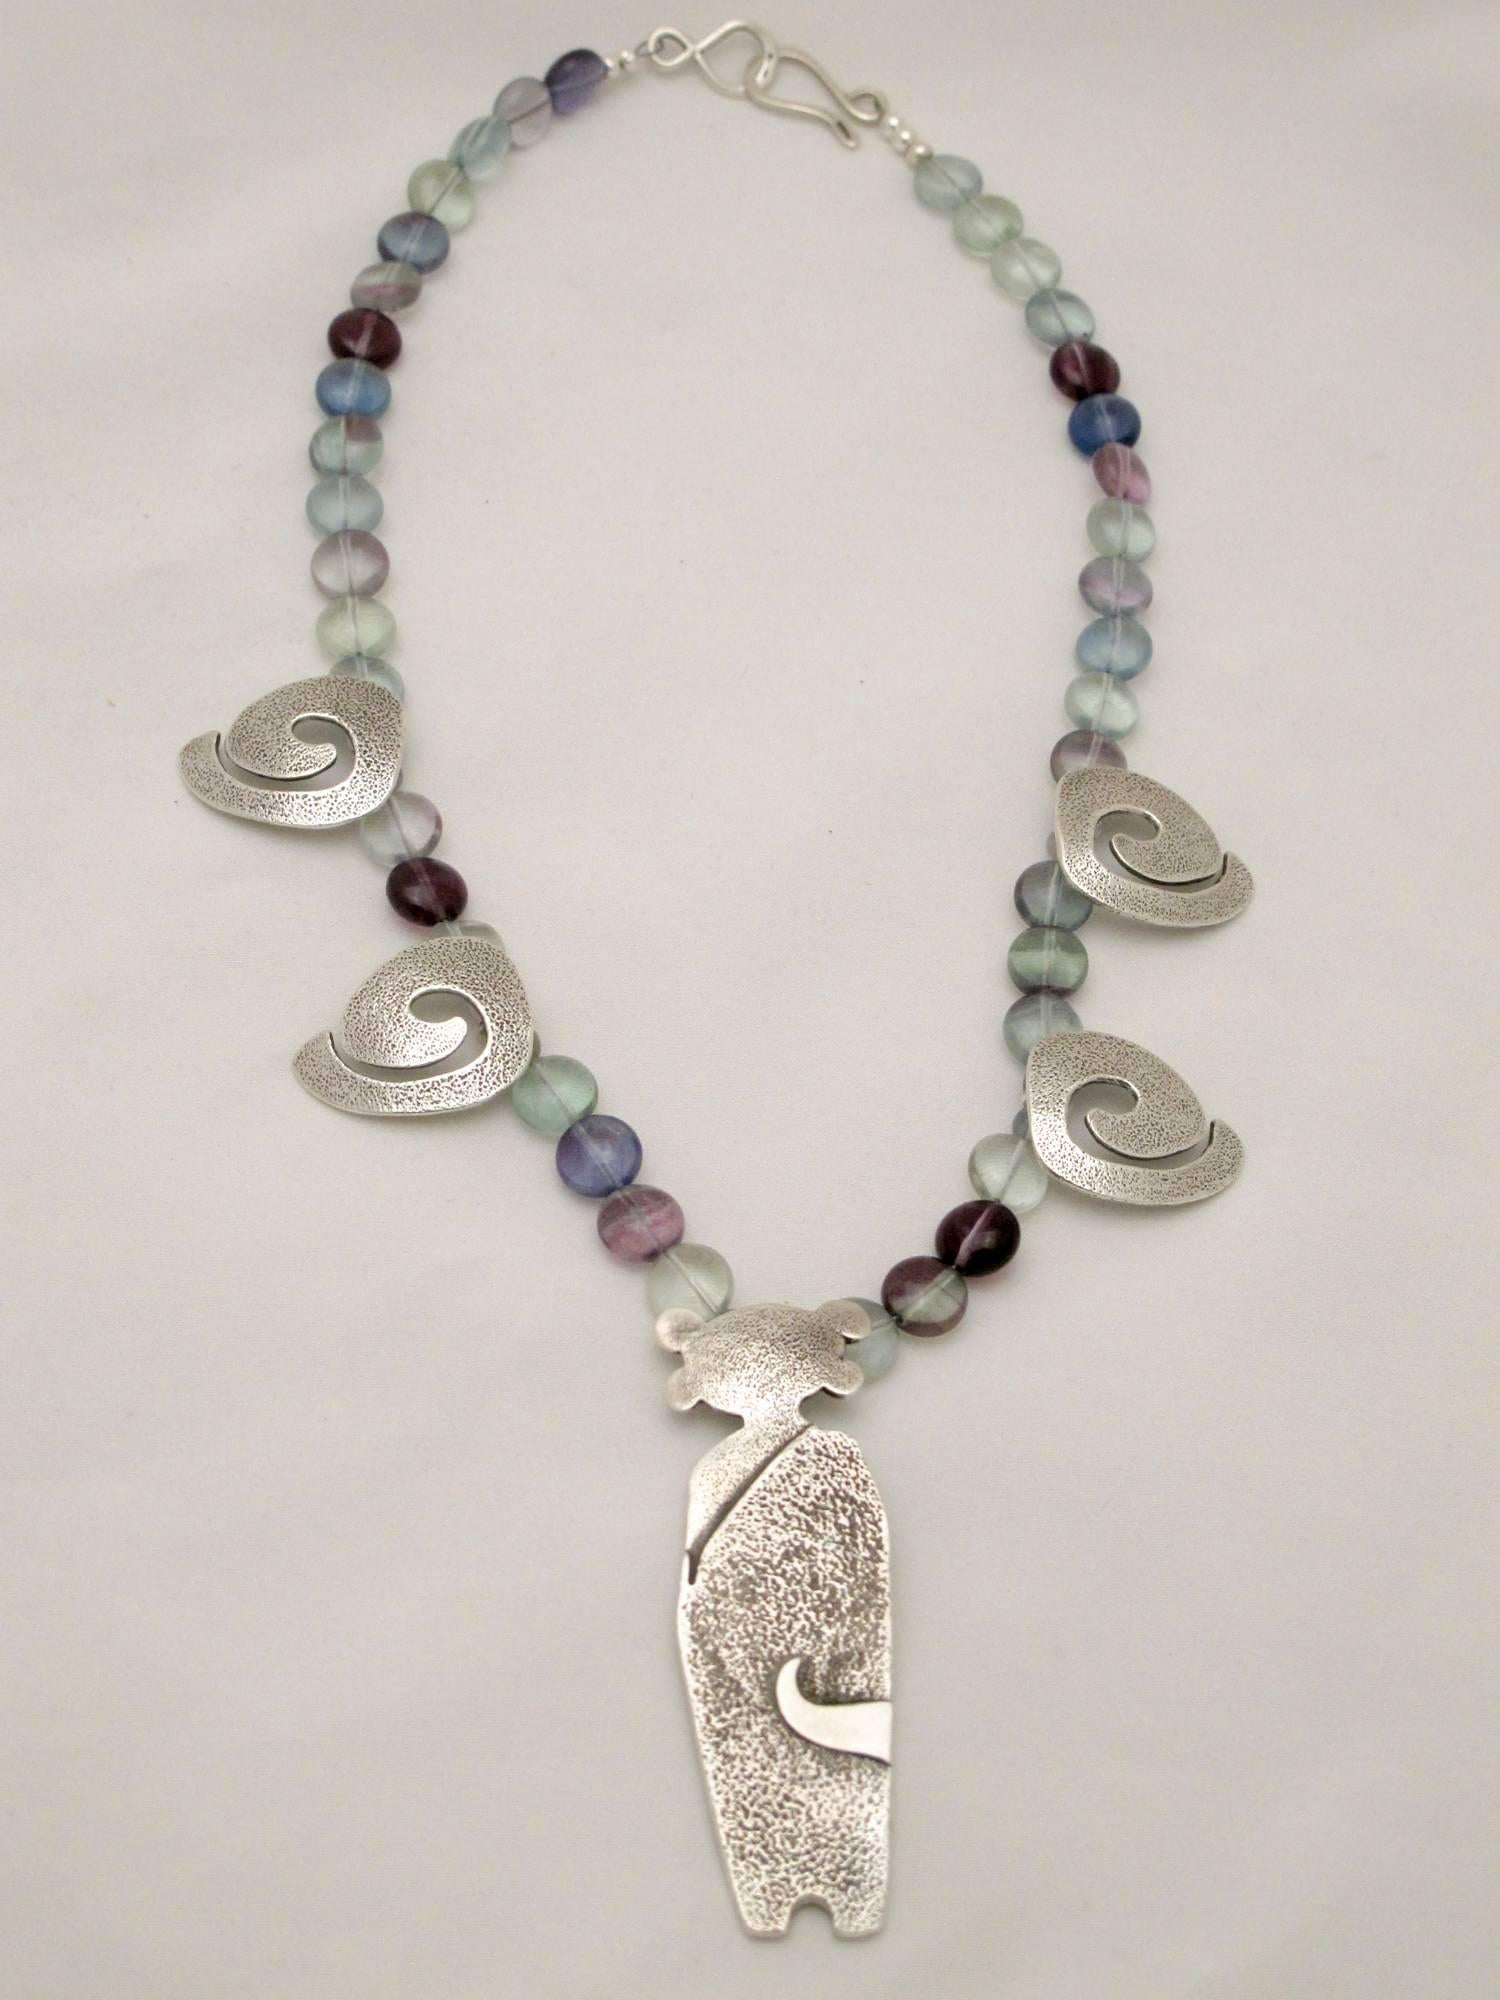 Standing Guard necklace, sterling silver, fluorite beads - Contemporary Mixed Media Art by Melanie Yazzie